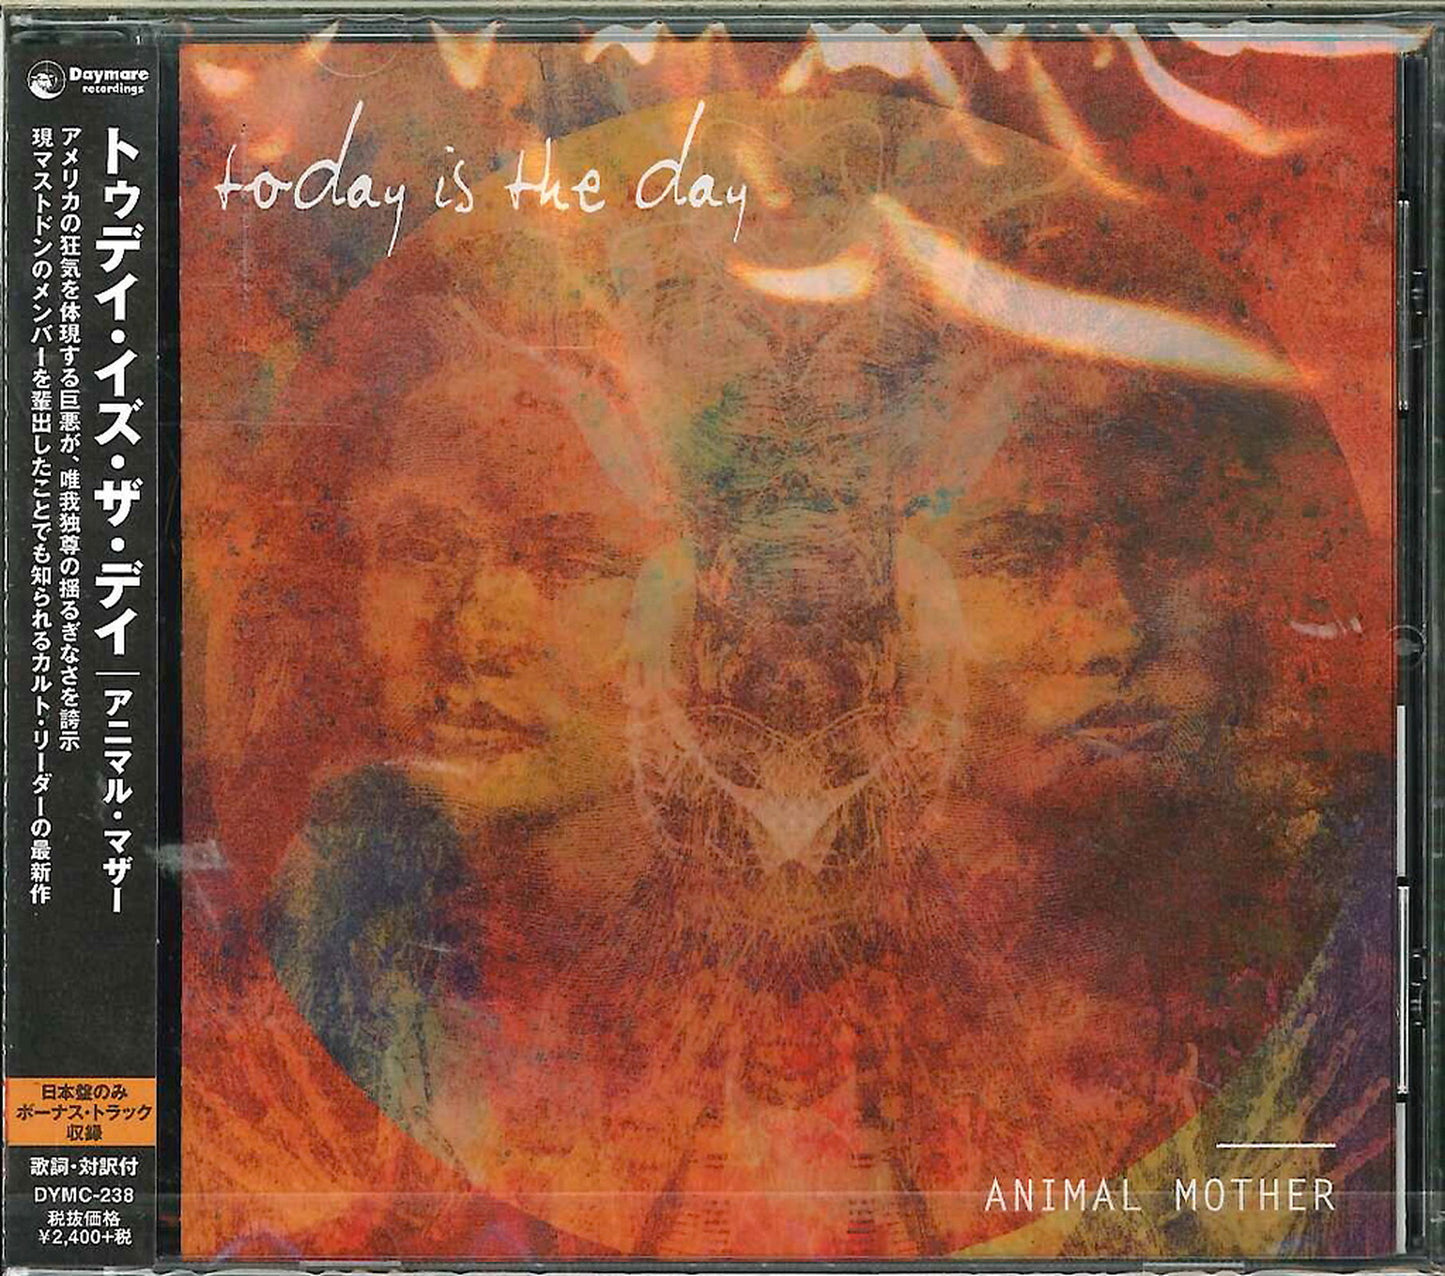 Today Is The Day - Animal Mother - Japan CD